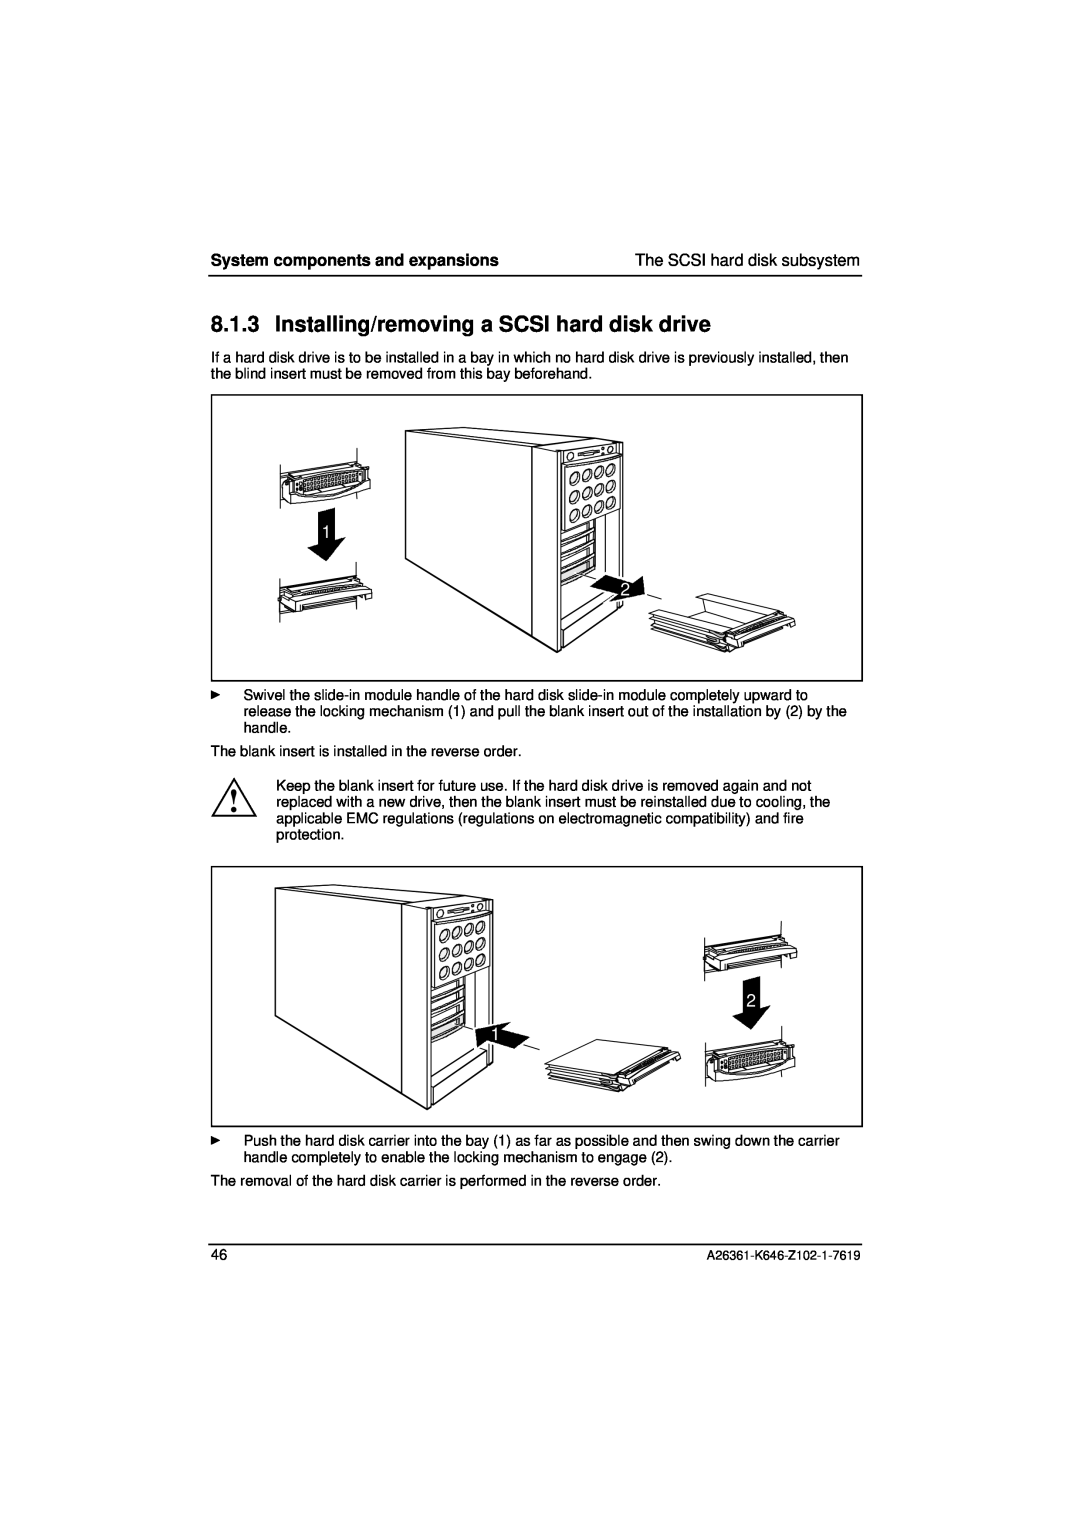 Fujitsu B120 manual Installing/removing a SCSI hard disk drive, System components and expansions 